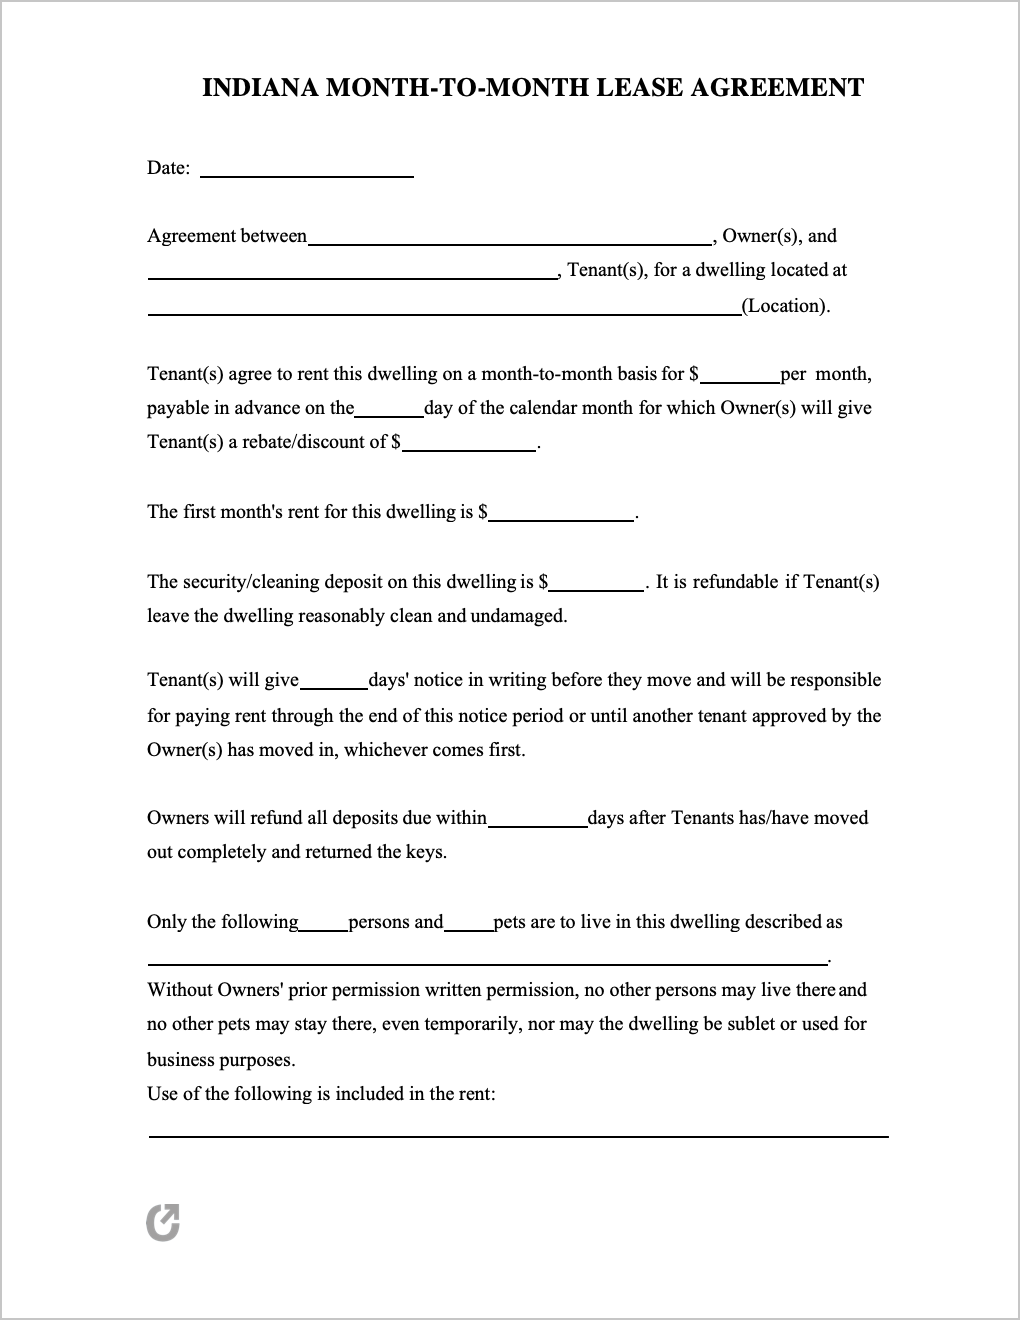 free-indiana-lease-agreement-templates-6-pdf-word-eforms